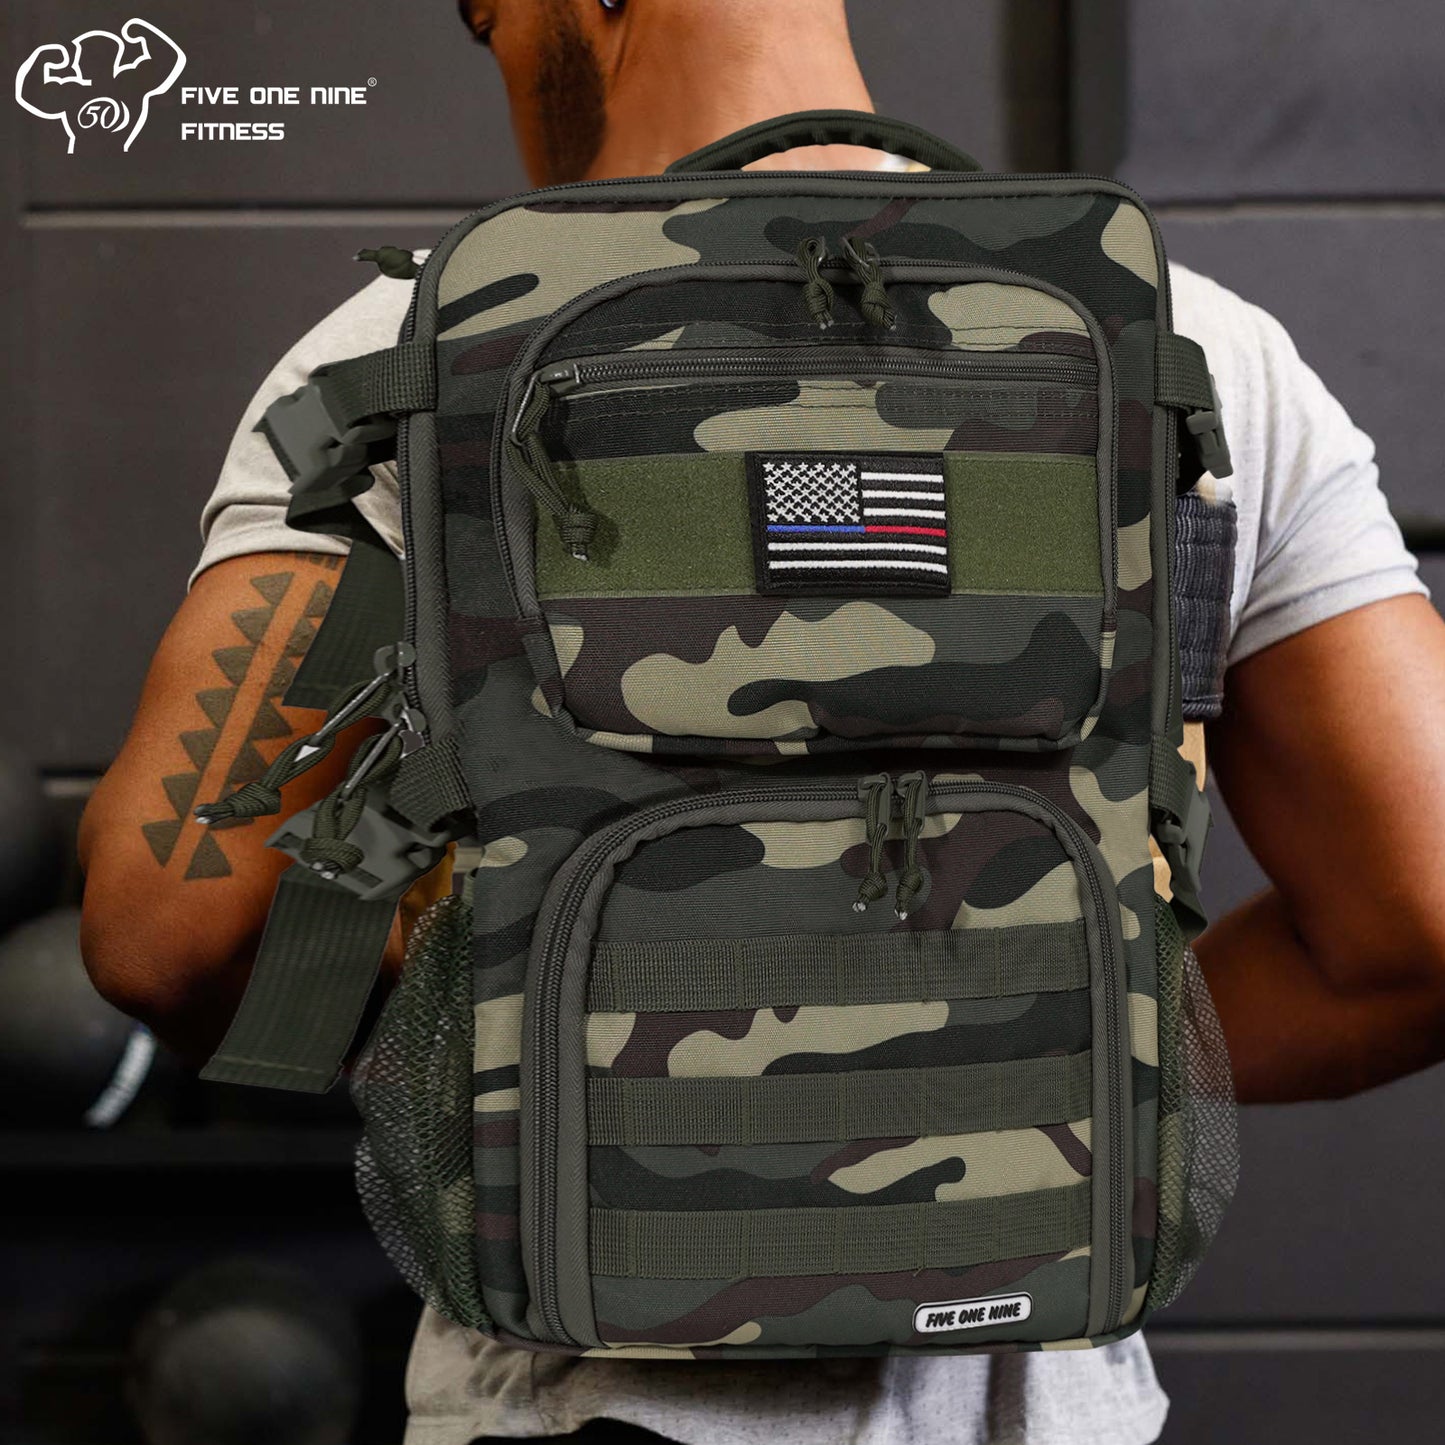 Tactical Meal Prep Backpack,519 Fitness Insulated Lunch Backpack with Removable Meal Compartment,16 Hours Insulation,Hiking Lunch Rucksack with Molle,Heavy Duty Hydration Backpack (Green Camo)